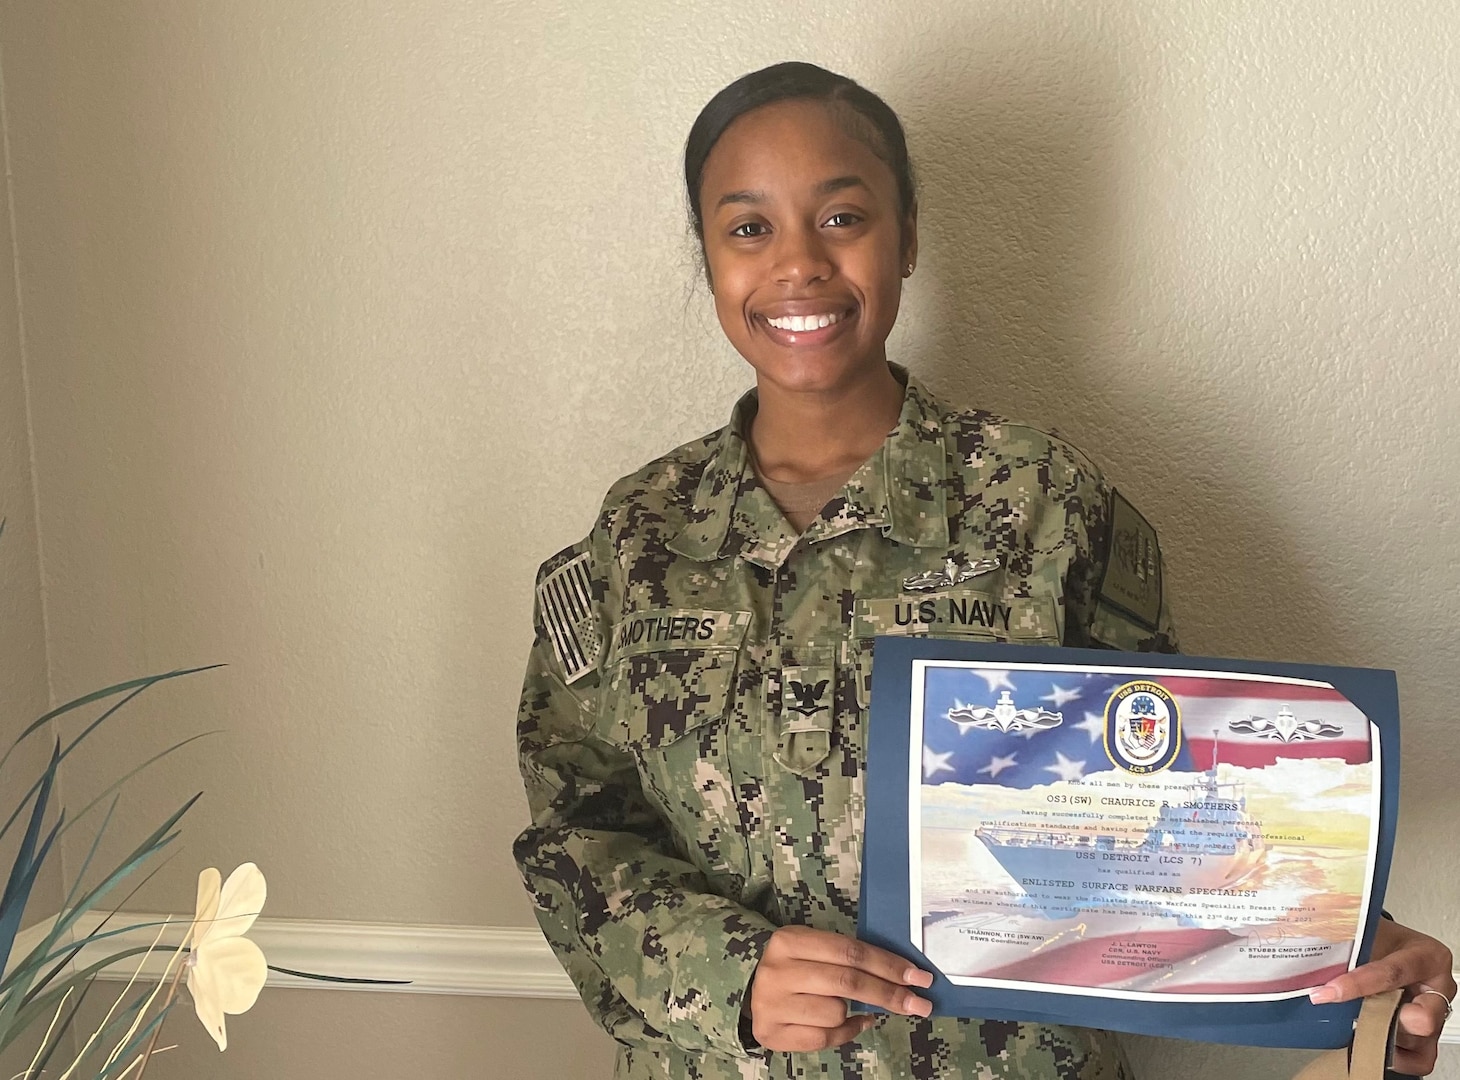 Operations Specialist 3rd Class Chaurice Smothers, LCSRON 2 is presented her Enlisted Surface Warfare Qualification by USS Detroit’s Commanding Officer on December 23rd, 2021. (Photo by Information Systems Technician Chief (IW/SW) Larronica Shannon)